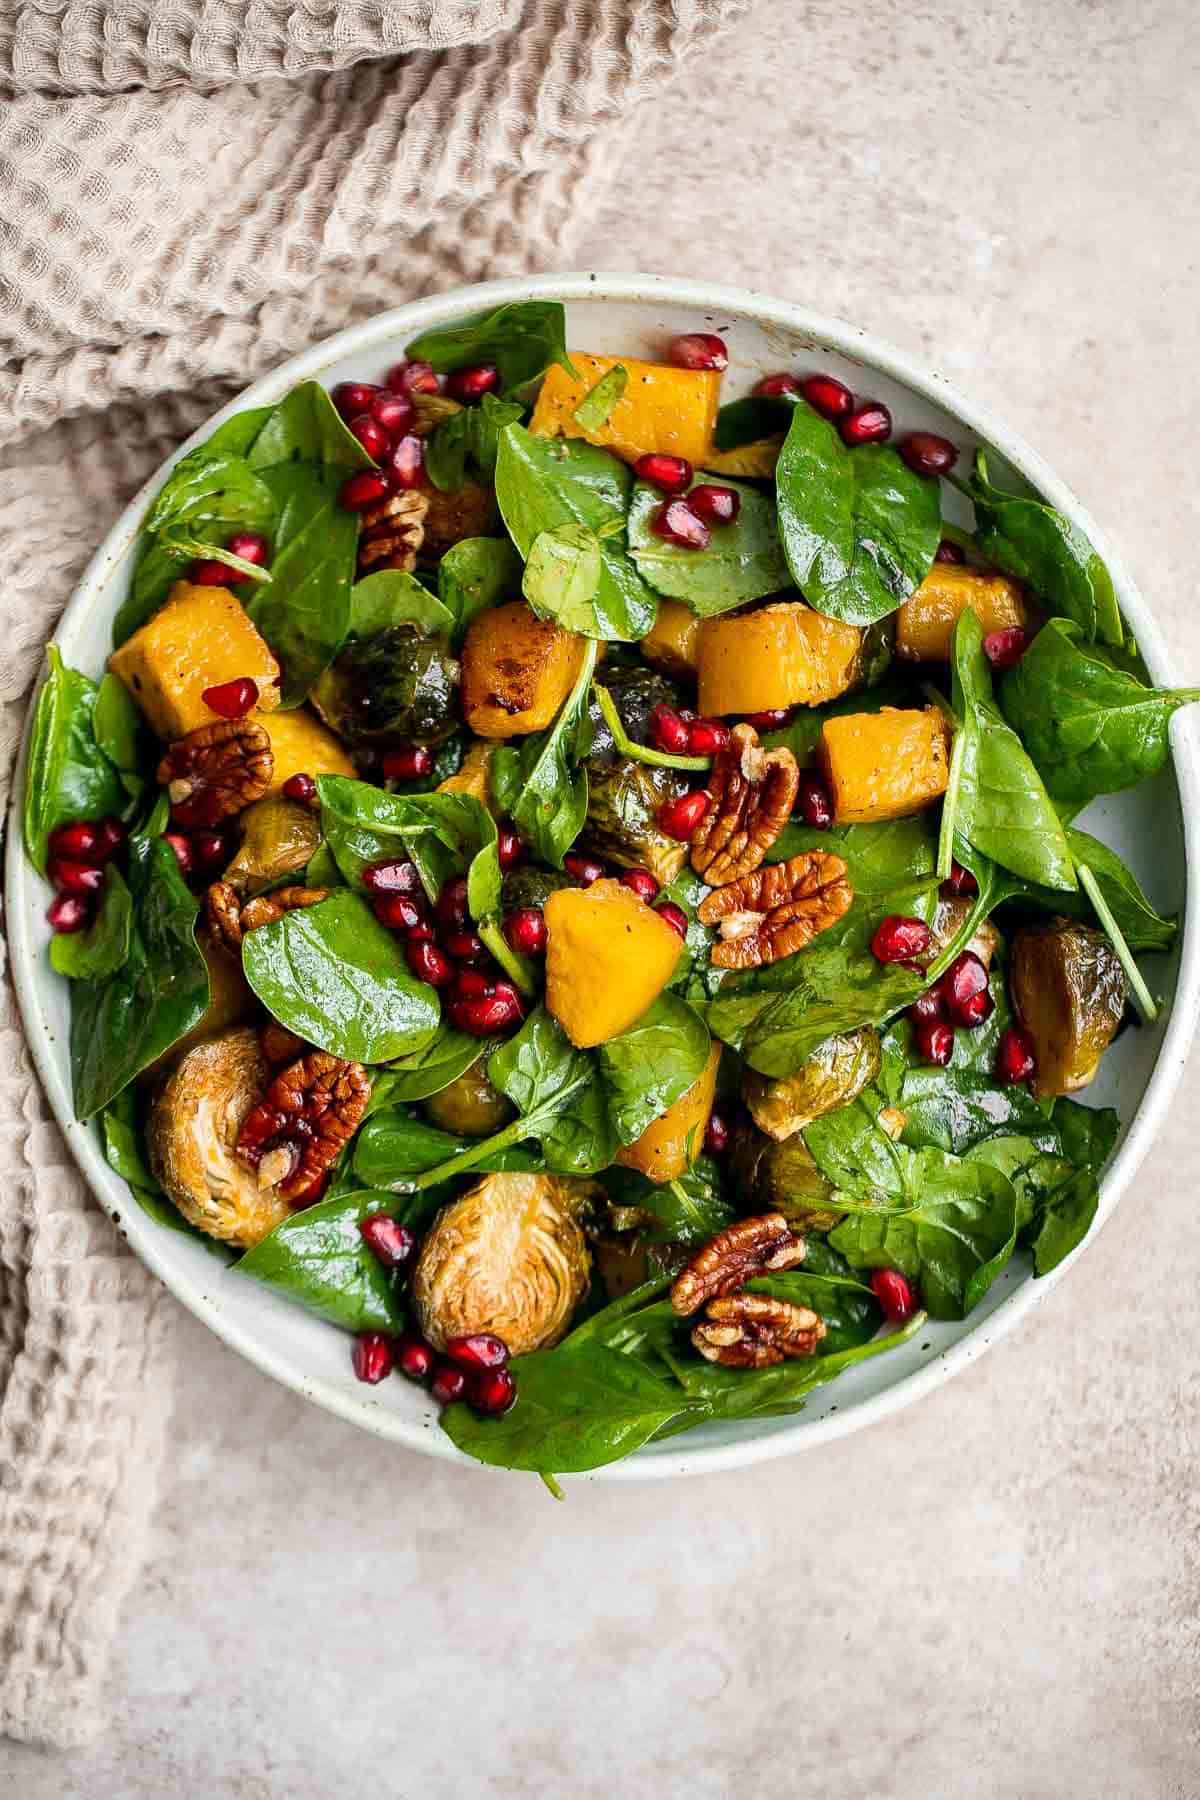 This simple and healthy Thanksgiving Salad is loaded with greens, seasonal veggies, pomegranate seeds, and pecans, all tossed in a homemade vinaigrette. | aheadofthyme.com